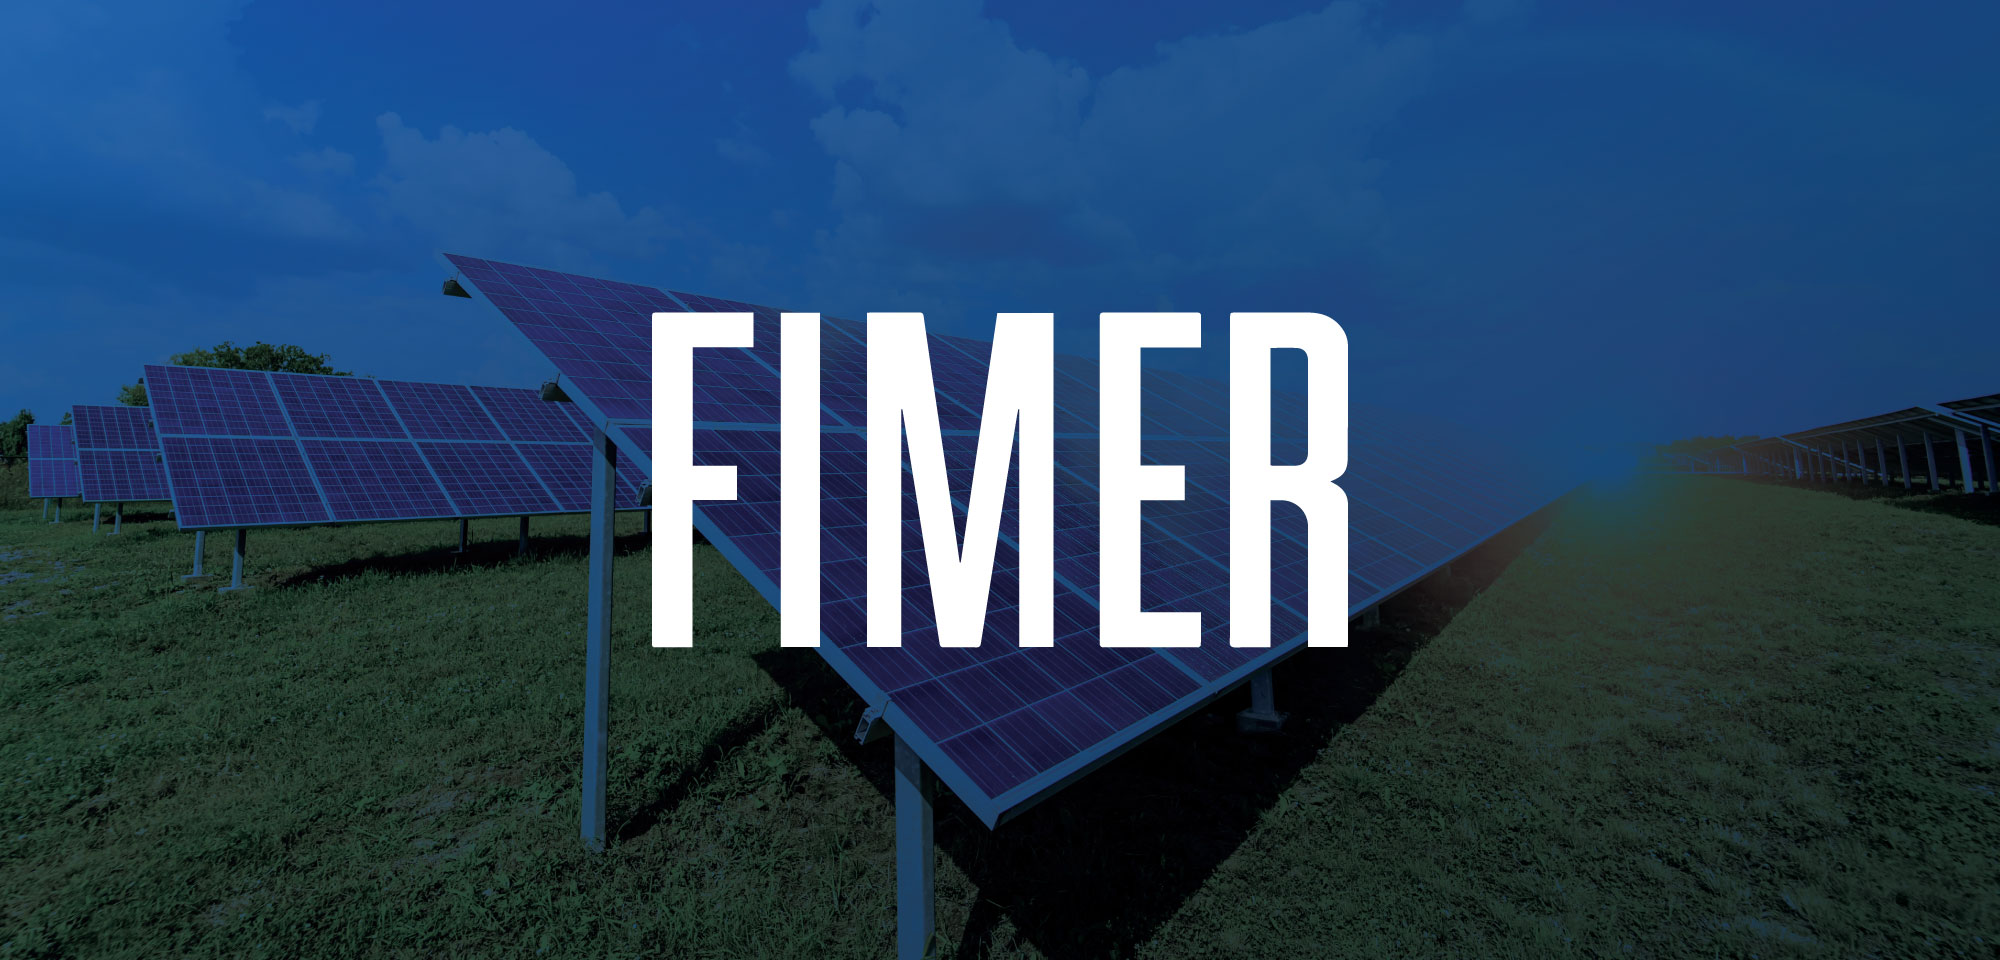 A deep dive into FIMER inverters and solar batteries